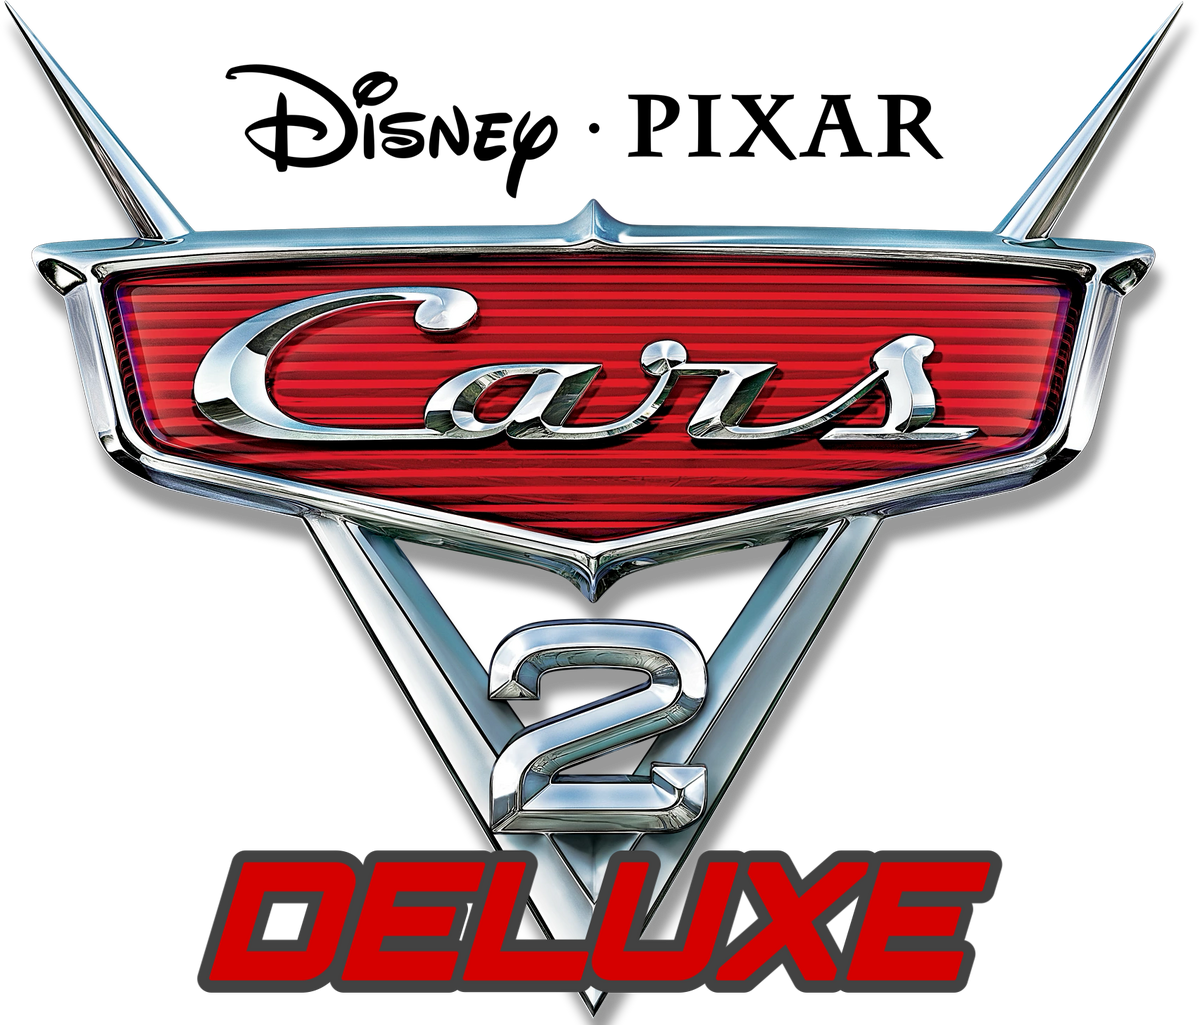 Cars 2: The Video Game Deluxe, Game Ideas Wiki